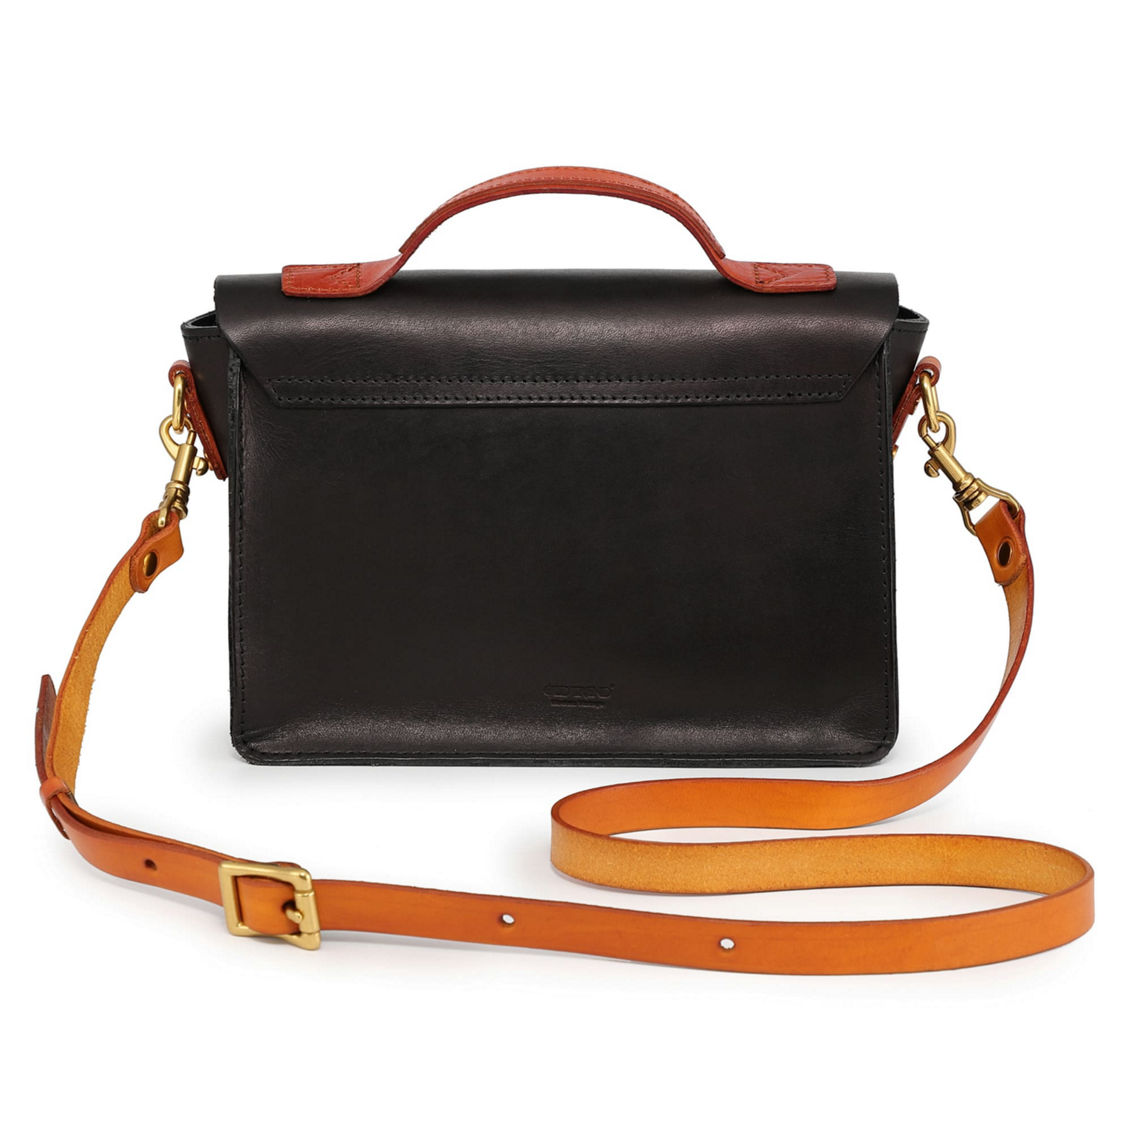 Old Trend Aster Mini Leather Satchel - Image 5 of 5